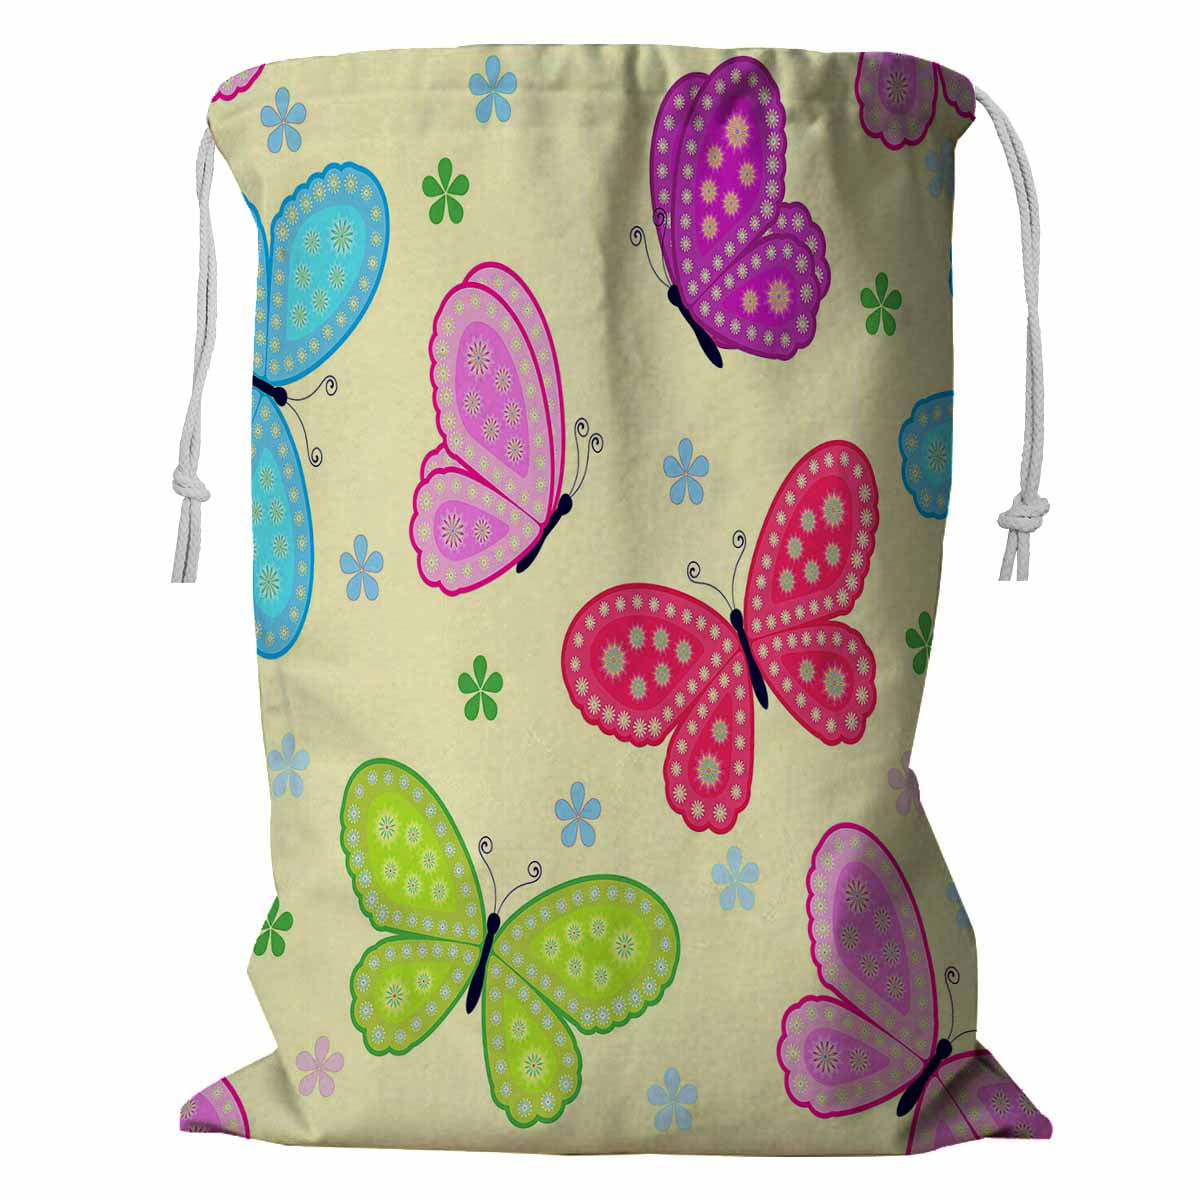 Butterfly Wall Hanging Fabric Quilted Basket Butterfly Hanging Storage PodDecorative Fabric BasketHanging Cotton BagStorage Organization